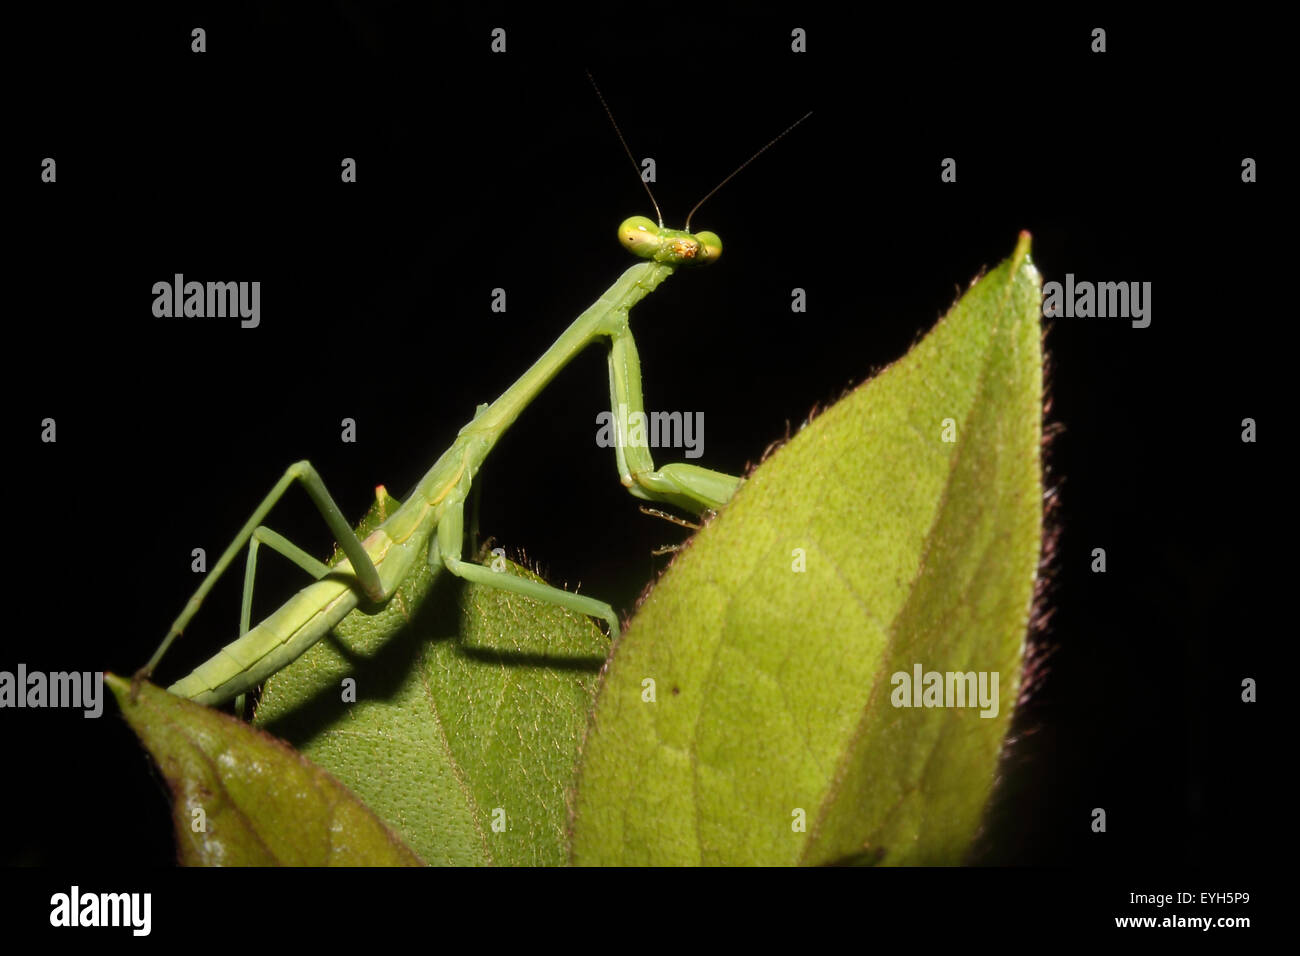 A Praying mantis moves about the foliage. Stock Photo